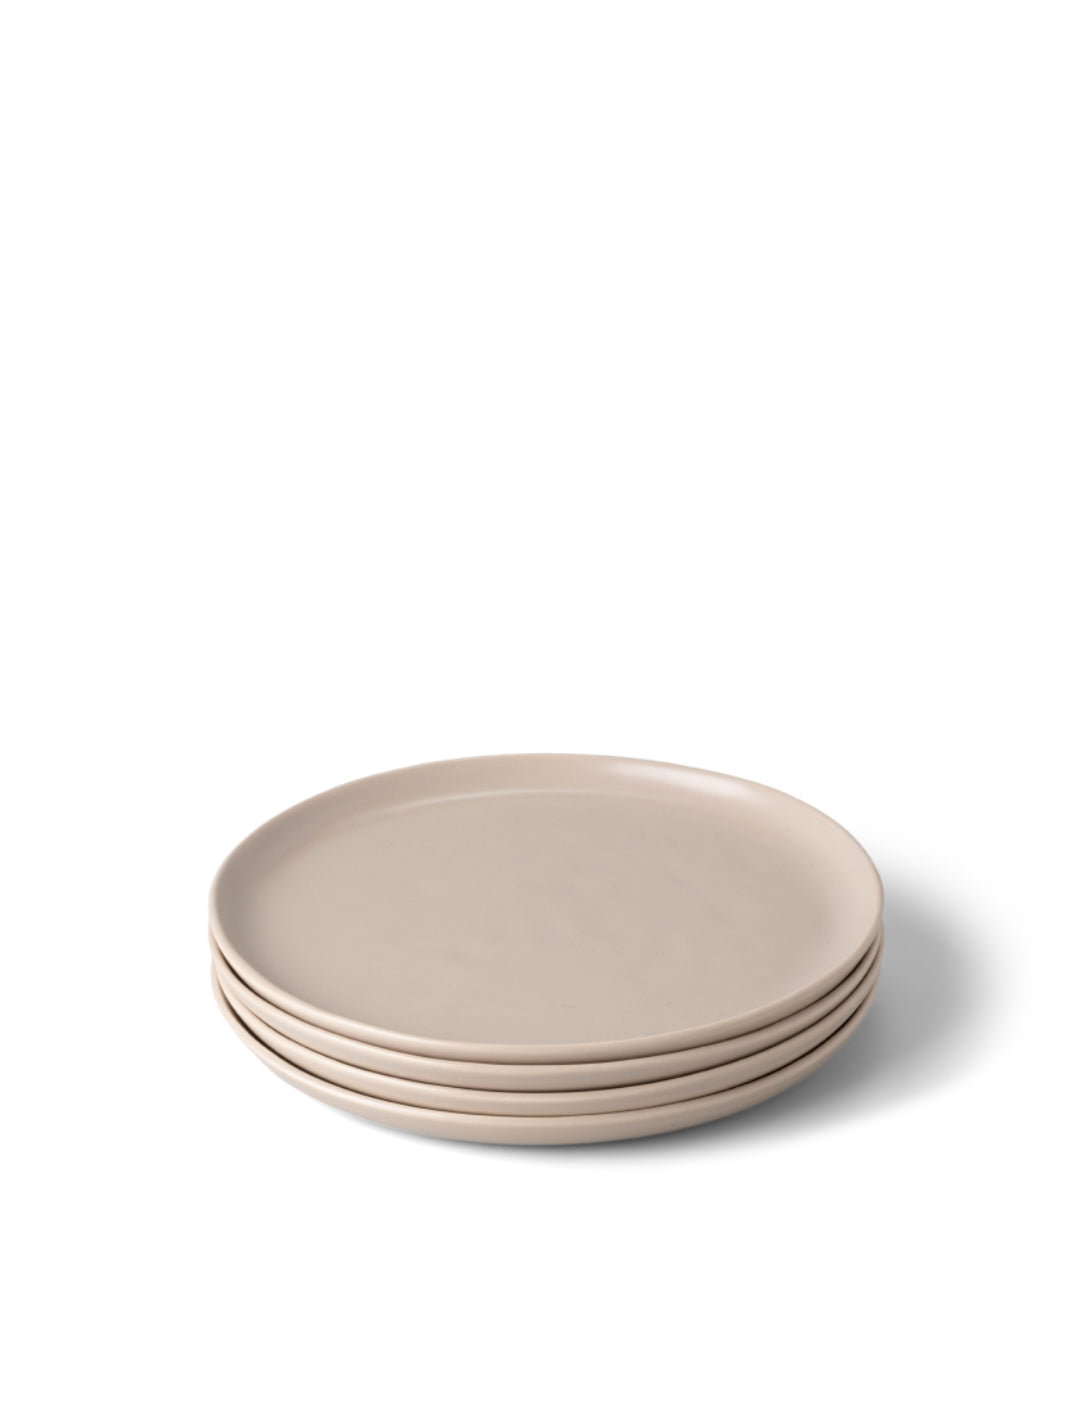 The Salad Plates, Salad Plates in Different Colors